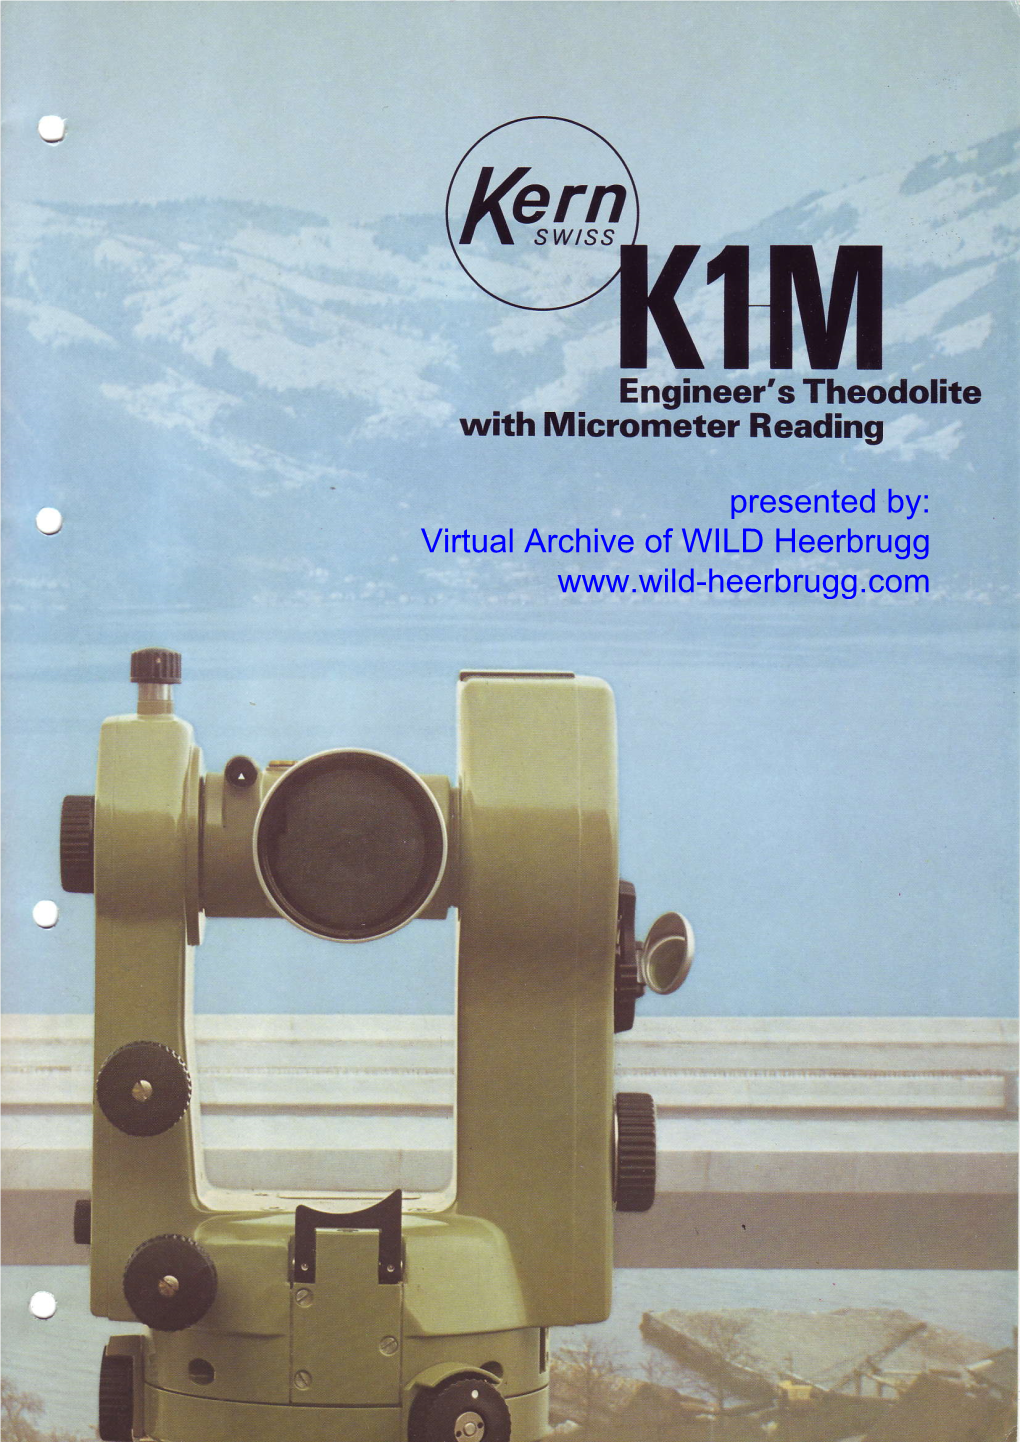 Engineer's Theodolite with Micrometer Reading